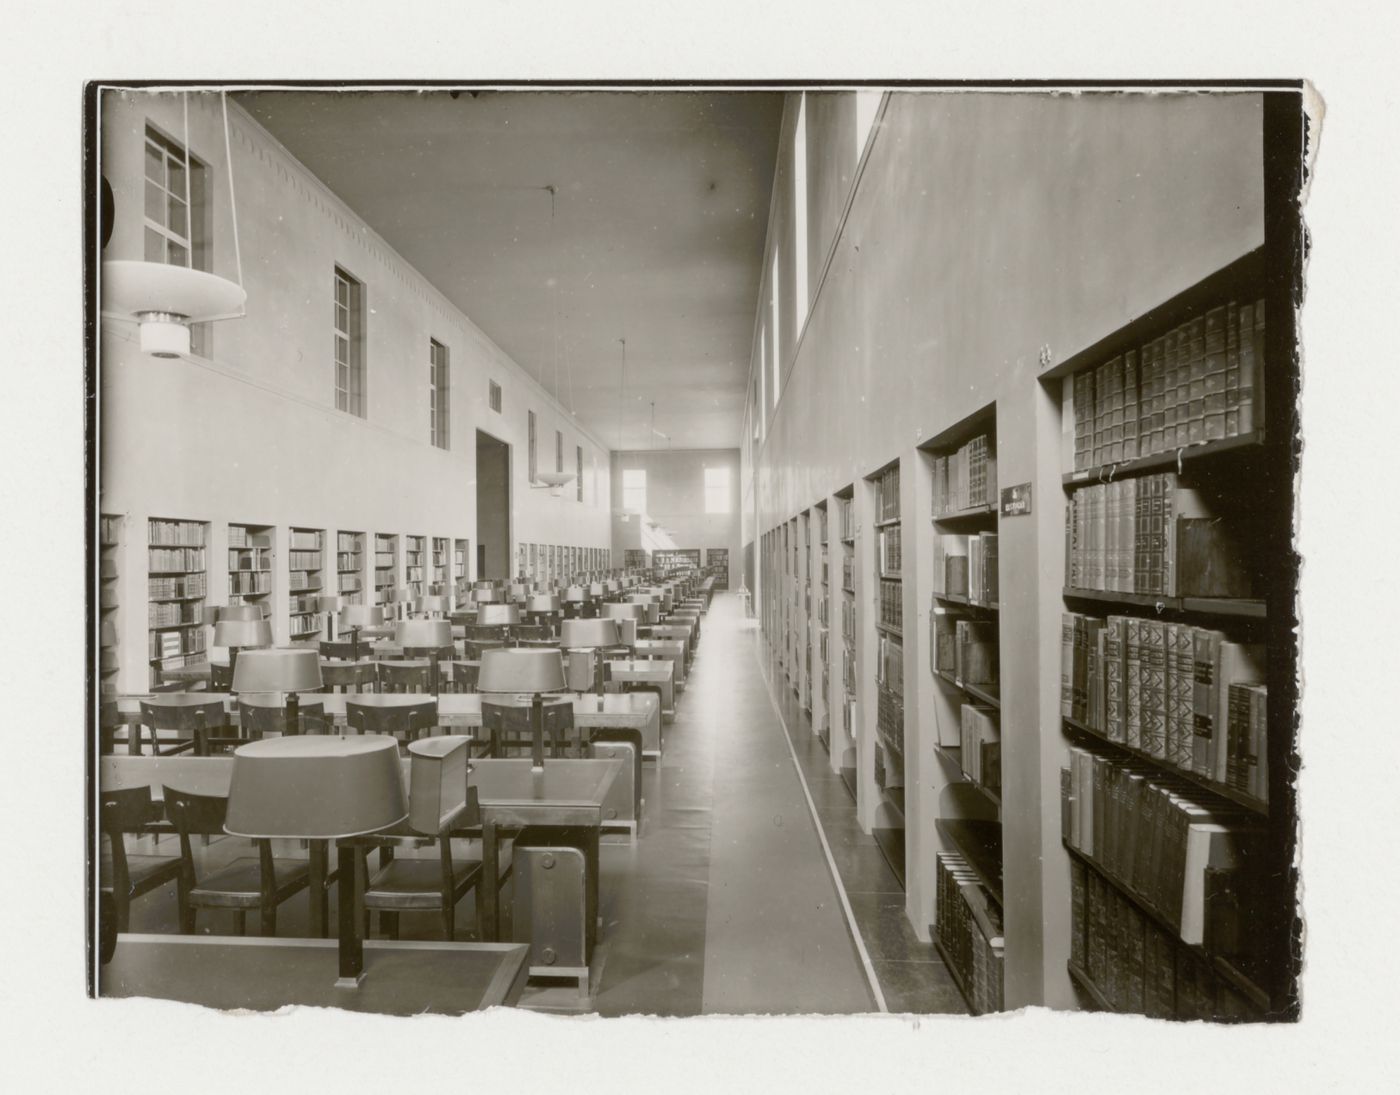 Interior view of the south reading room of Stockholm Public Library showing tables, chairs and bookshelves, 51-55 Odengatan, Stockholm